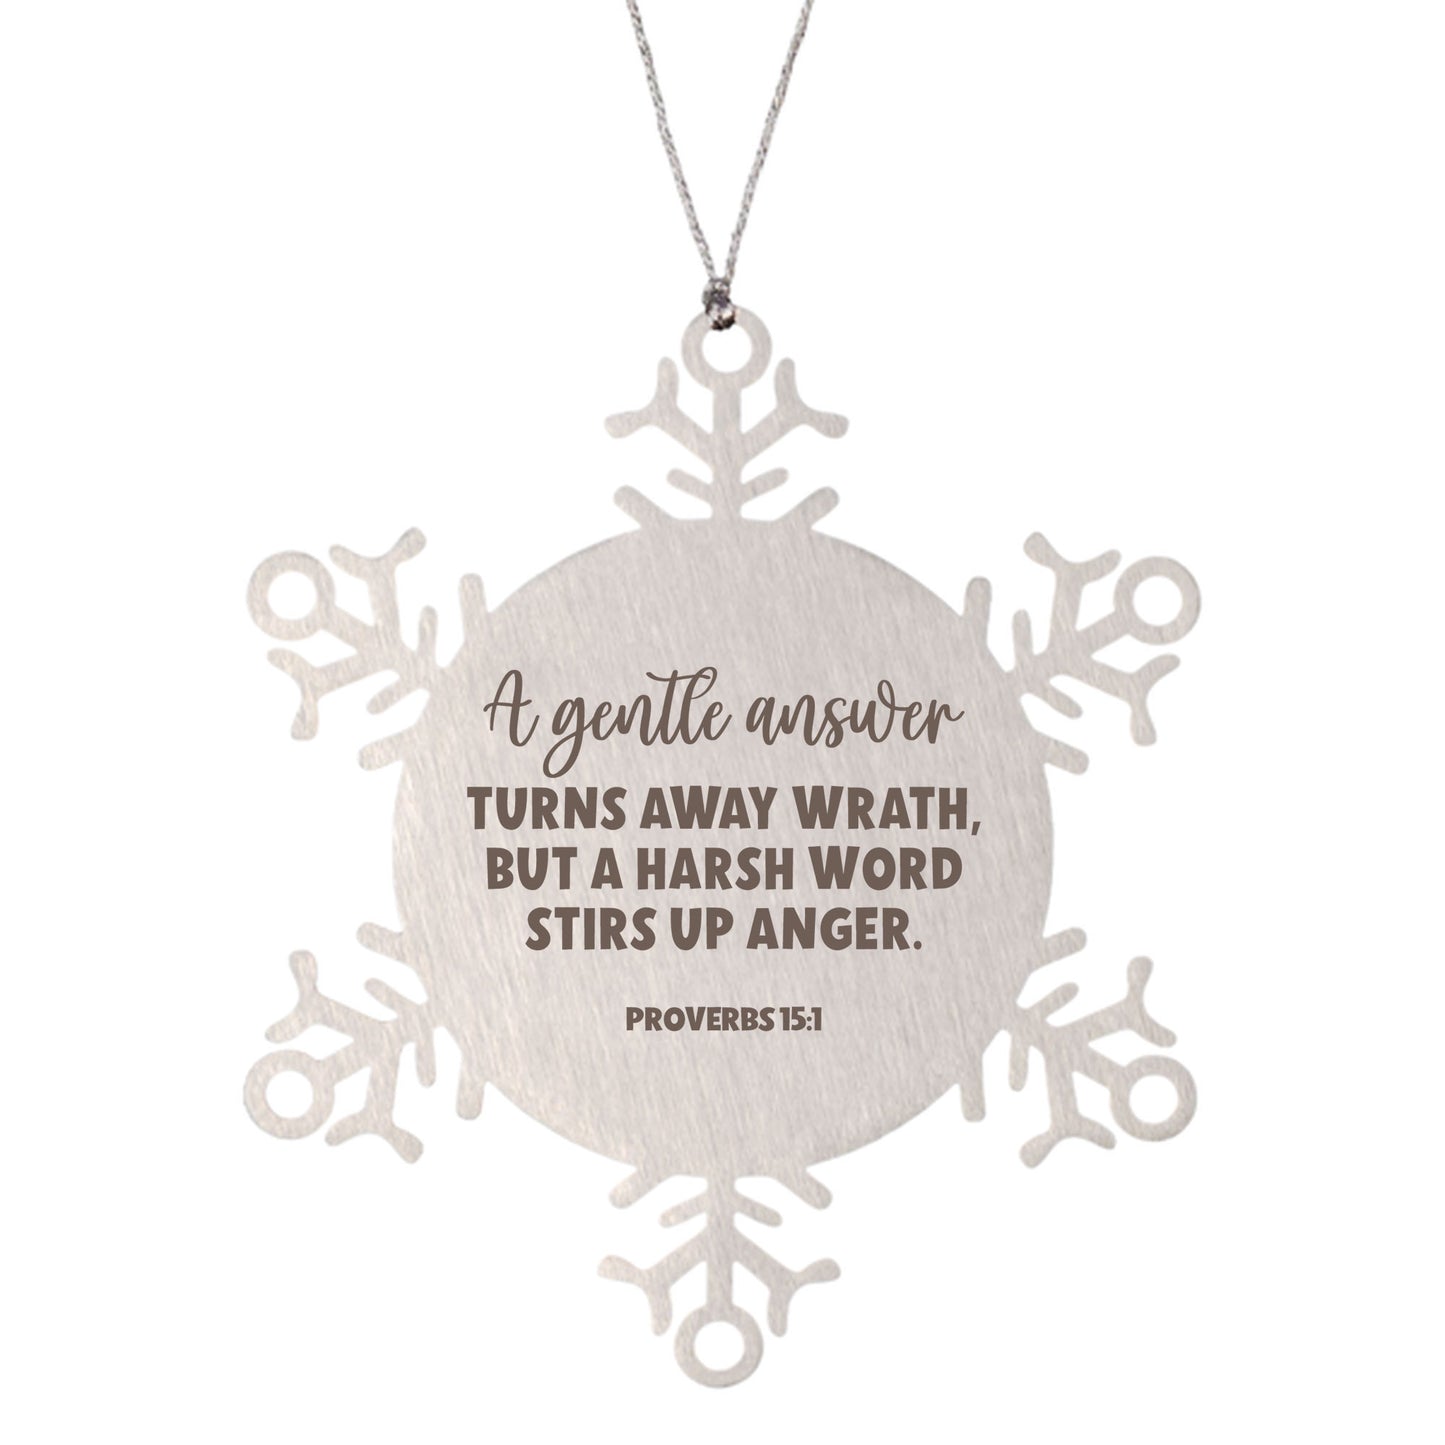 Proverbs 15:1, A Gentle Answer Turns Away Wrath But A Harsh Word Stirs Up Anger Ornament, Engraved Bible Verse Christmas Ornament